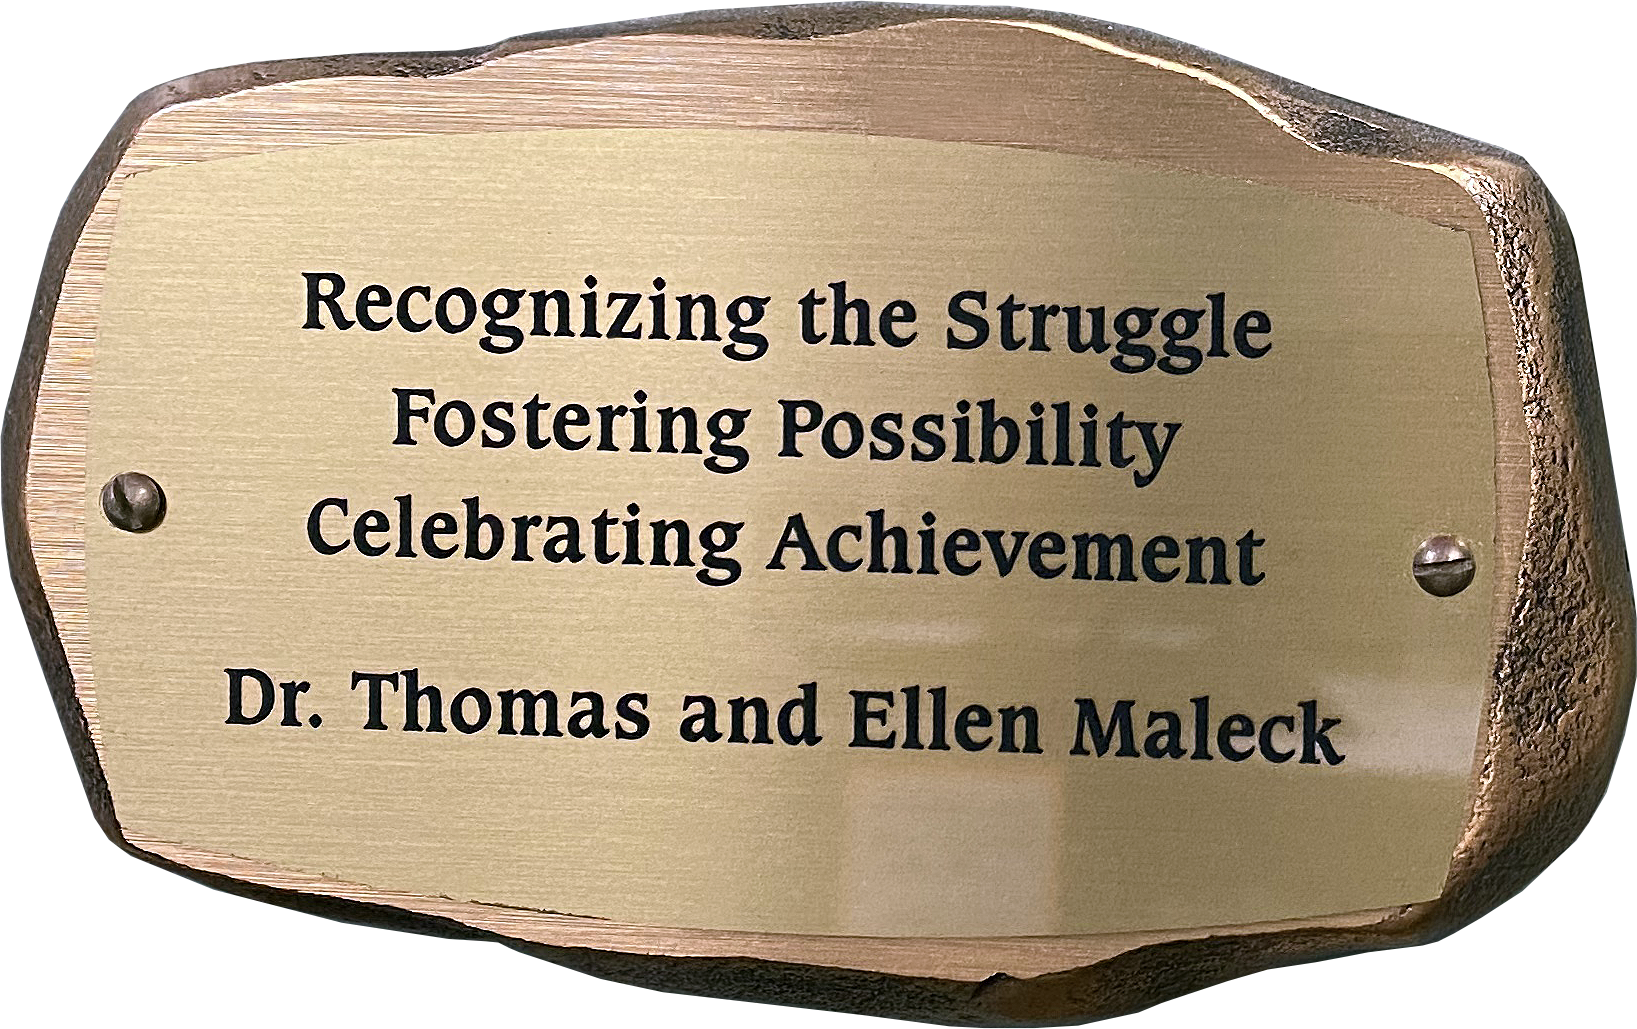 Inscribed bronze plaque in the shape of a rock with text on it reading: Recognizing the Struggle, Fostering Possibility, Celebrating Achievement. Dr. Thomas and Ellen Maleck